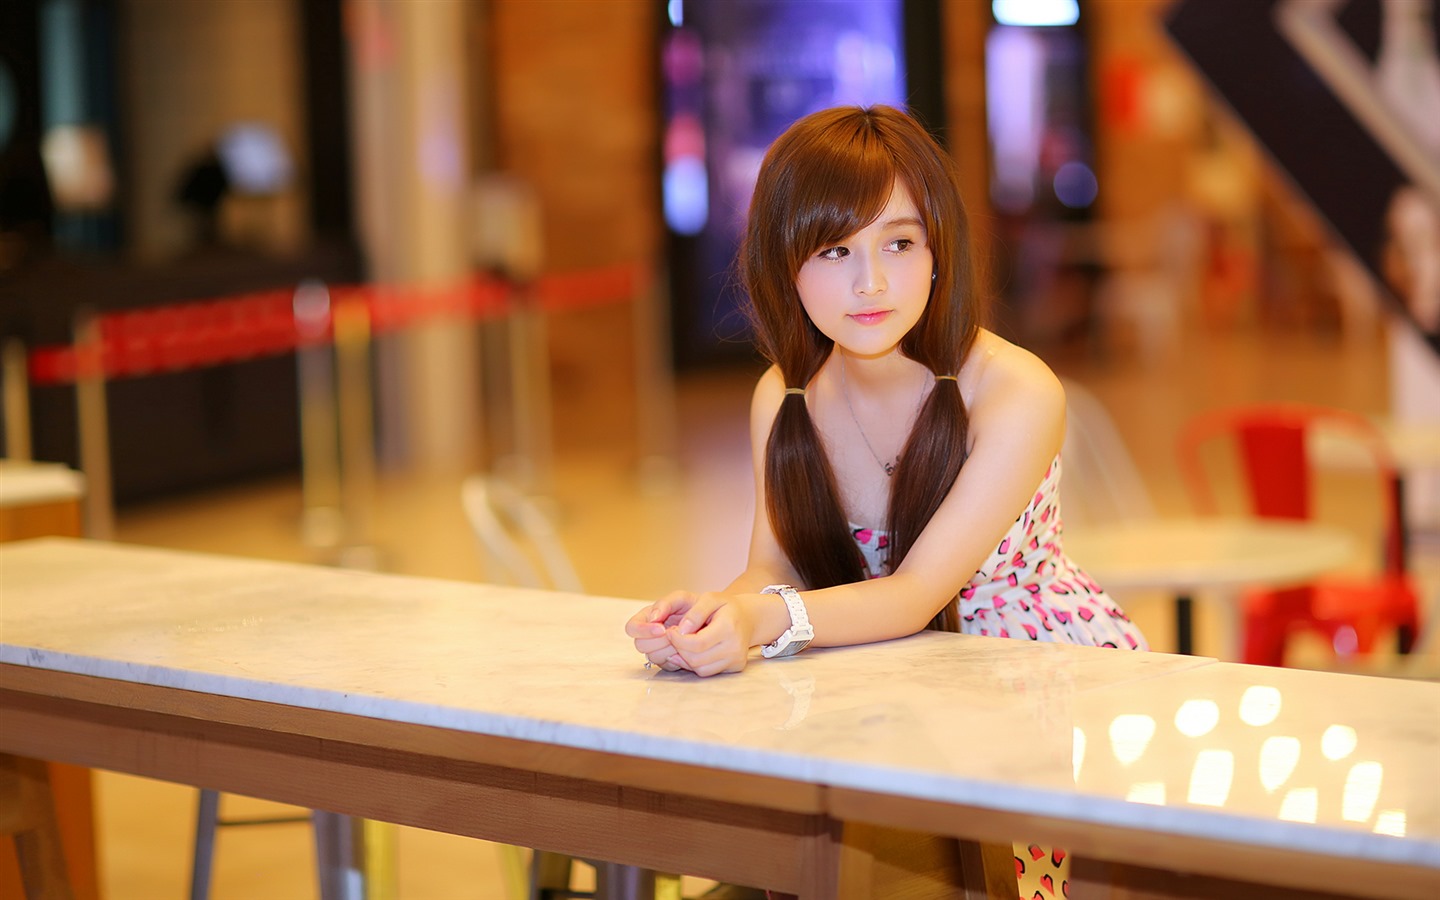 Pure and lovely young Asian girl HD wallpapers collection (2) #38 - 1440x900